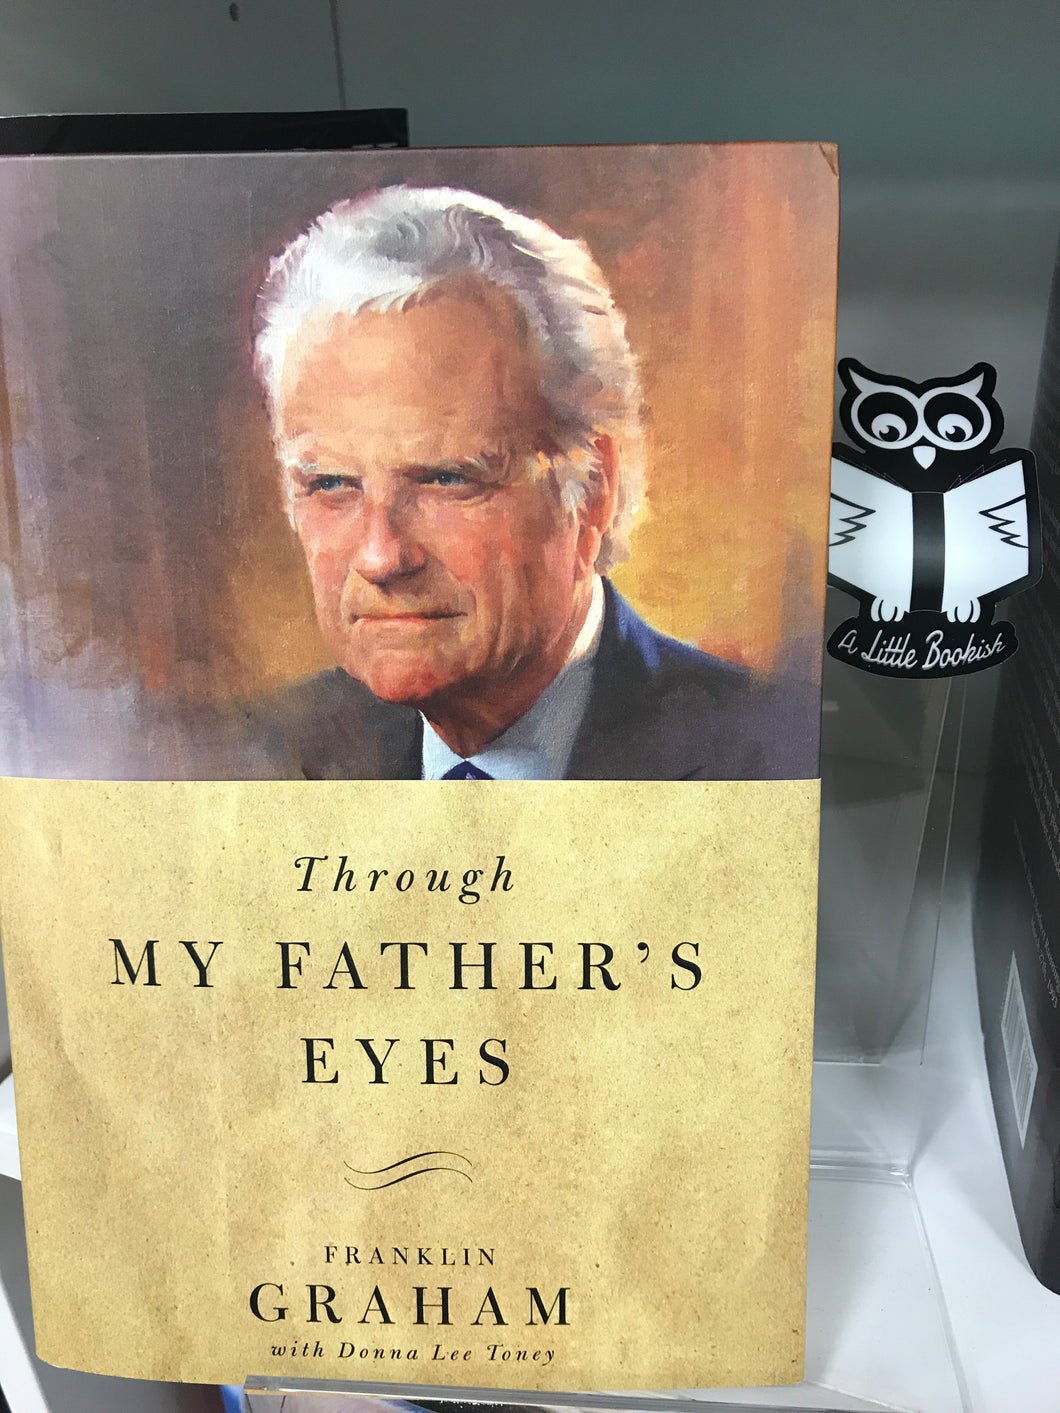 Through My Father’s Eyes by Franklin Graham